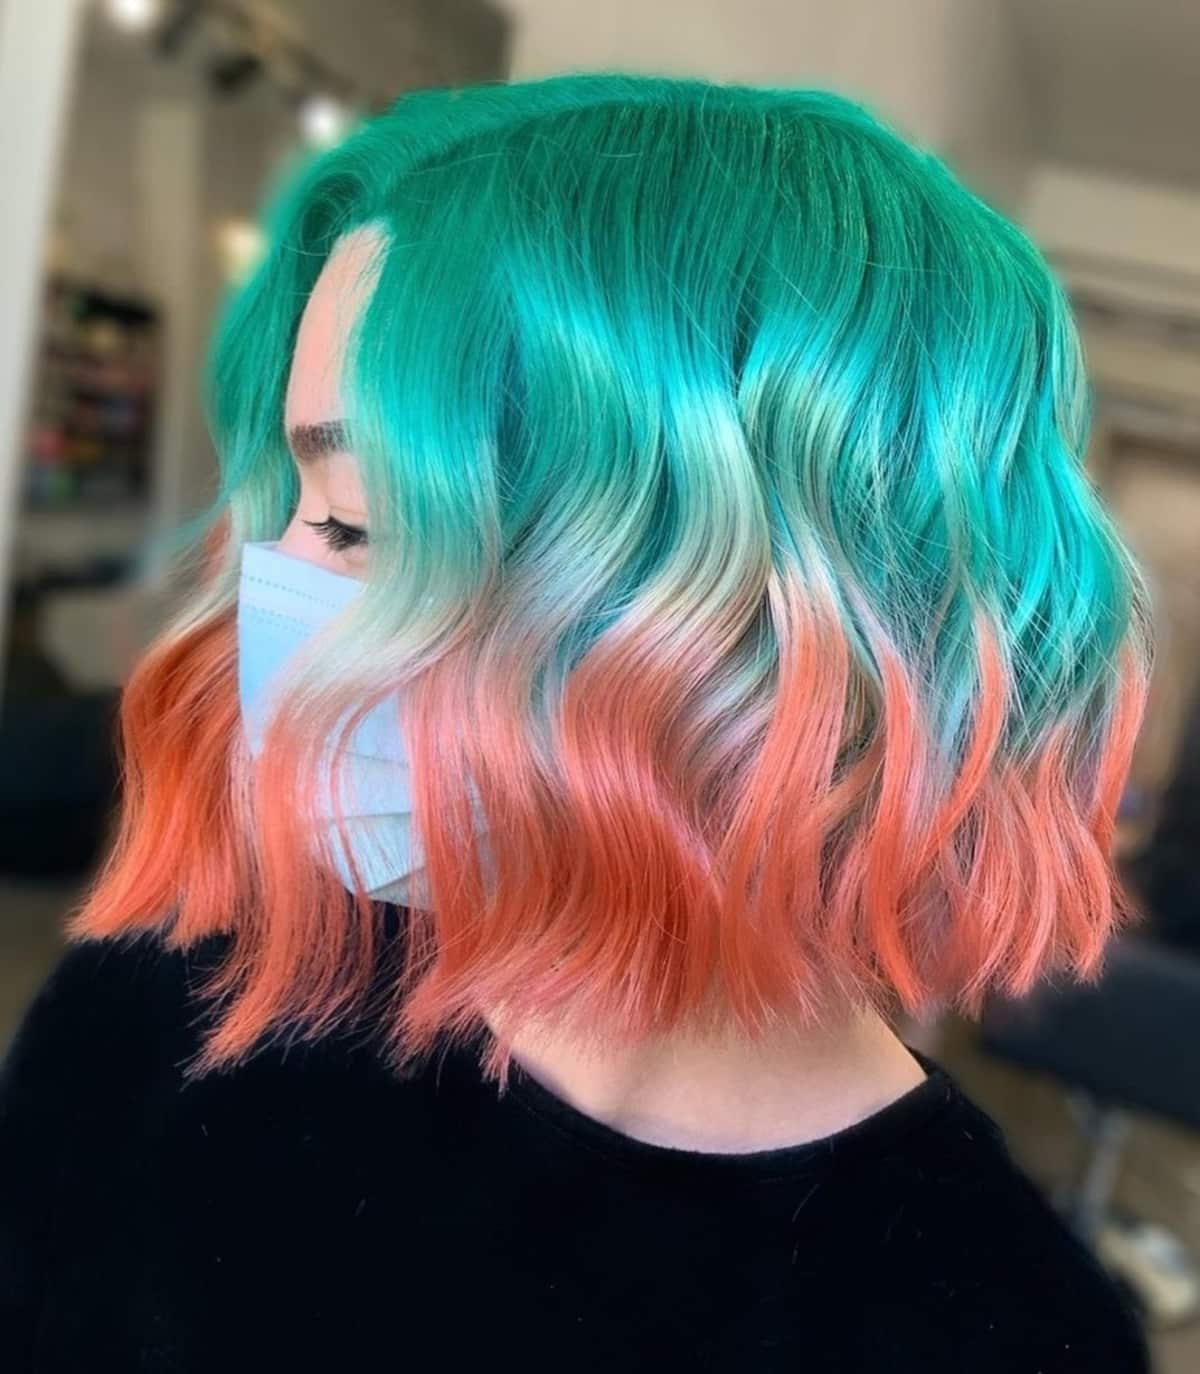 Peach and teal